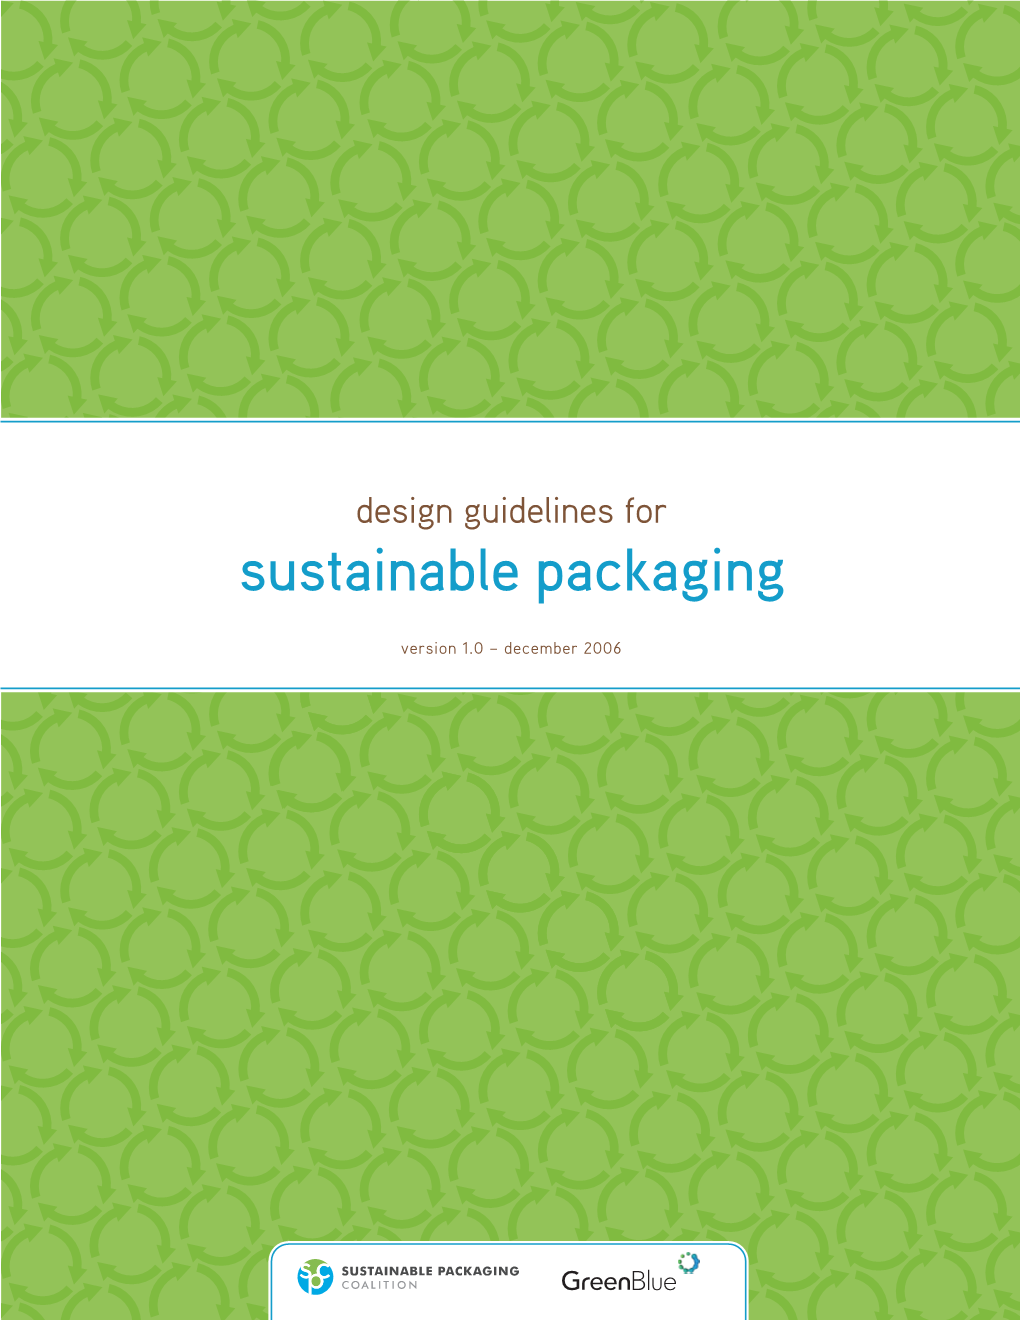 Design Guidelines for Sustainable Packaging